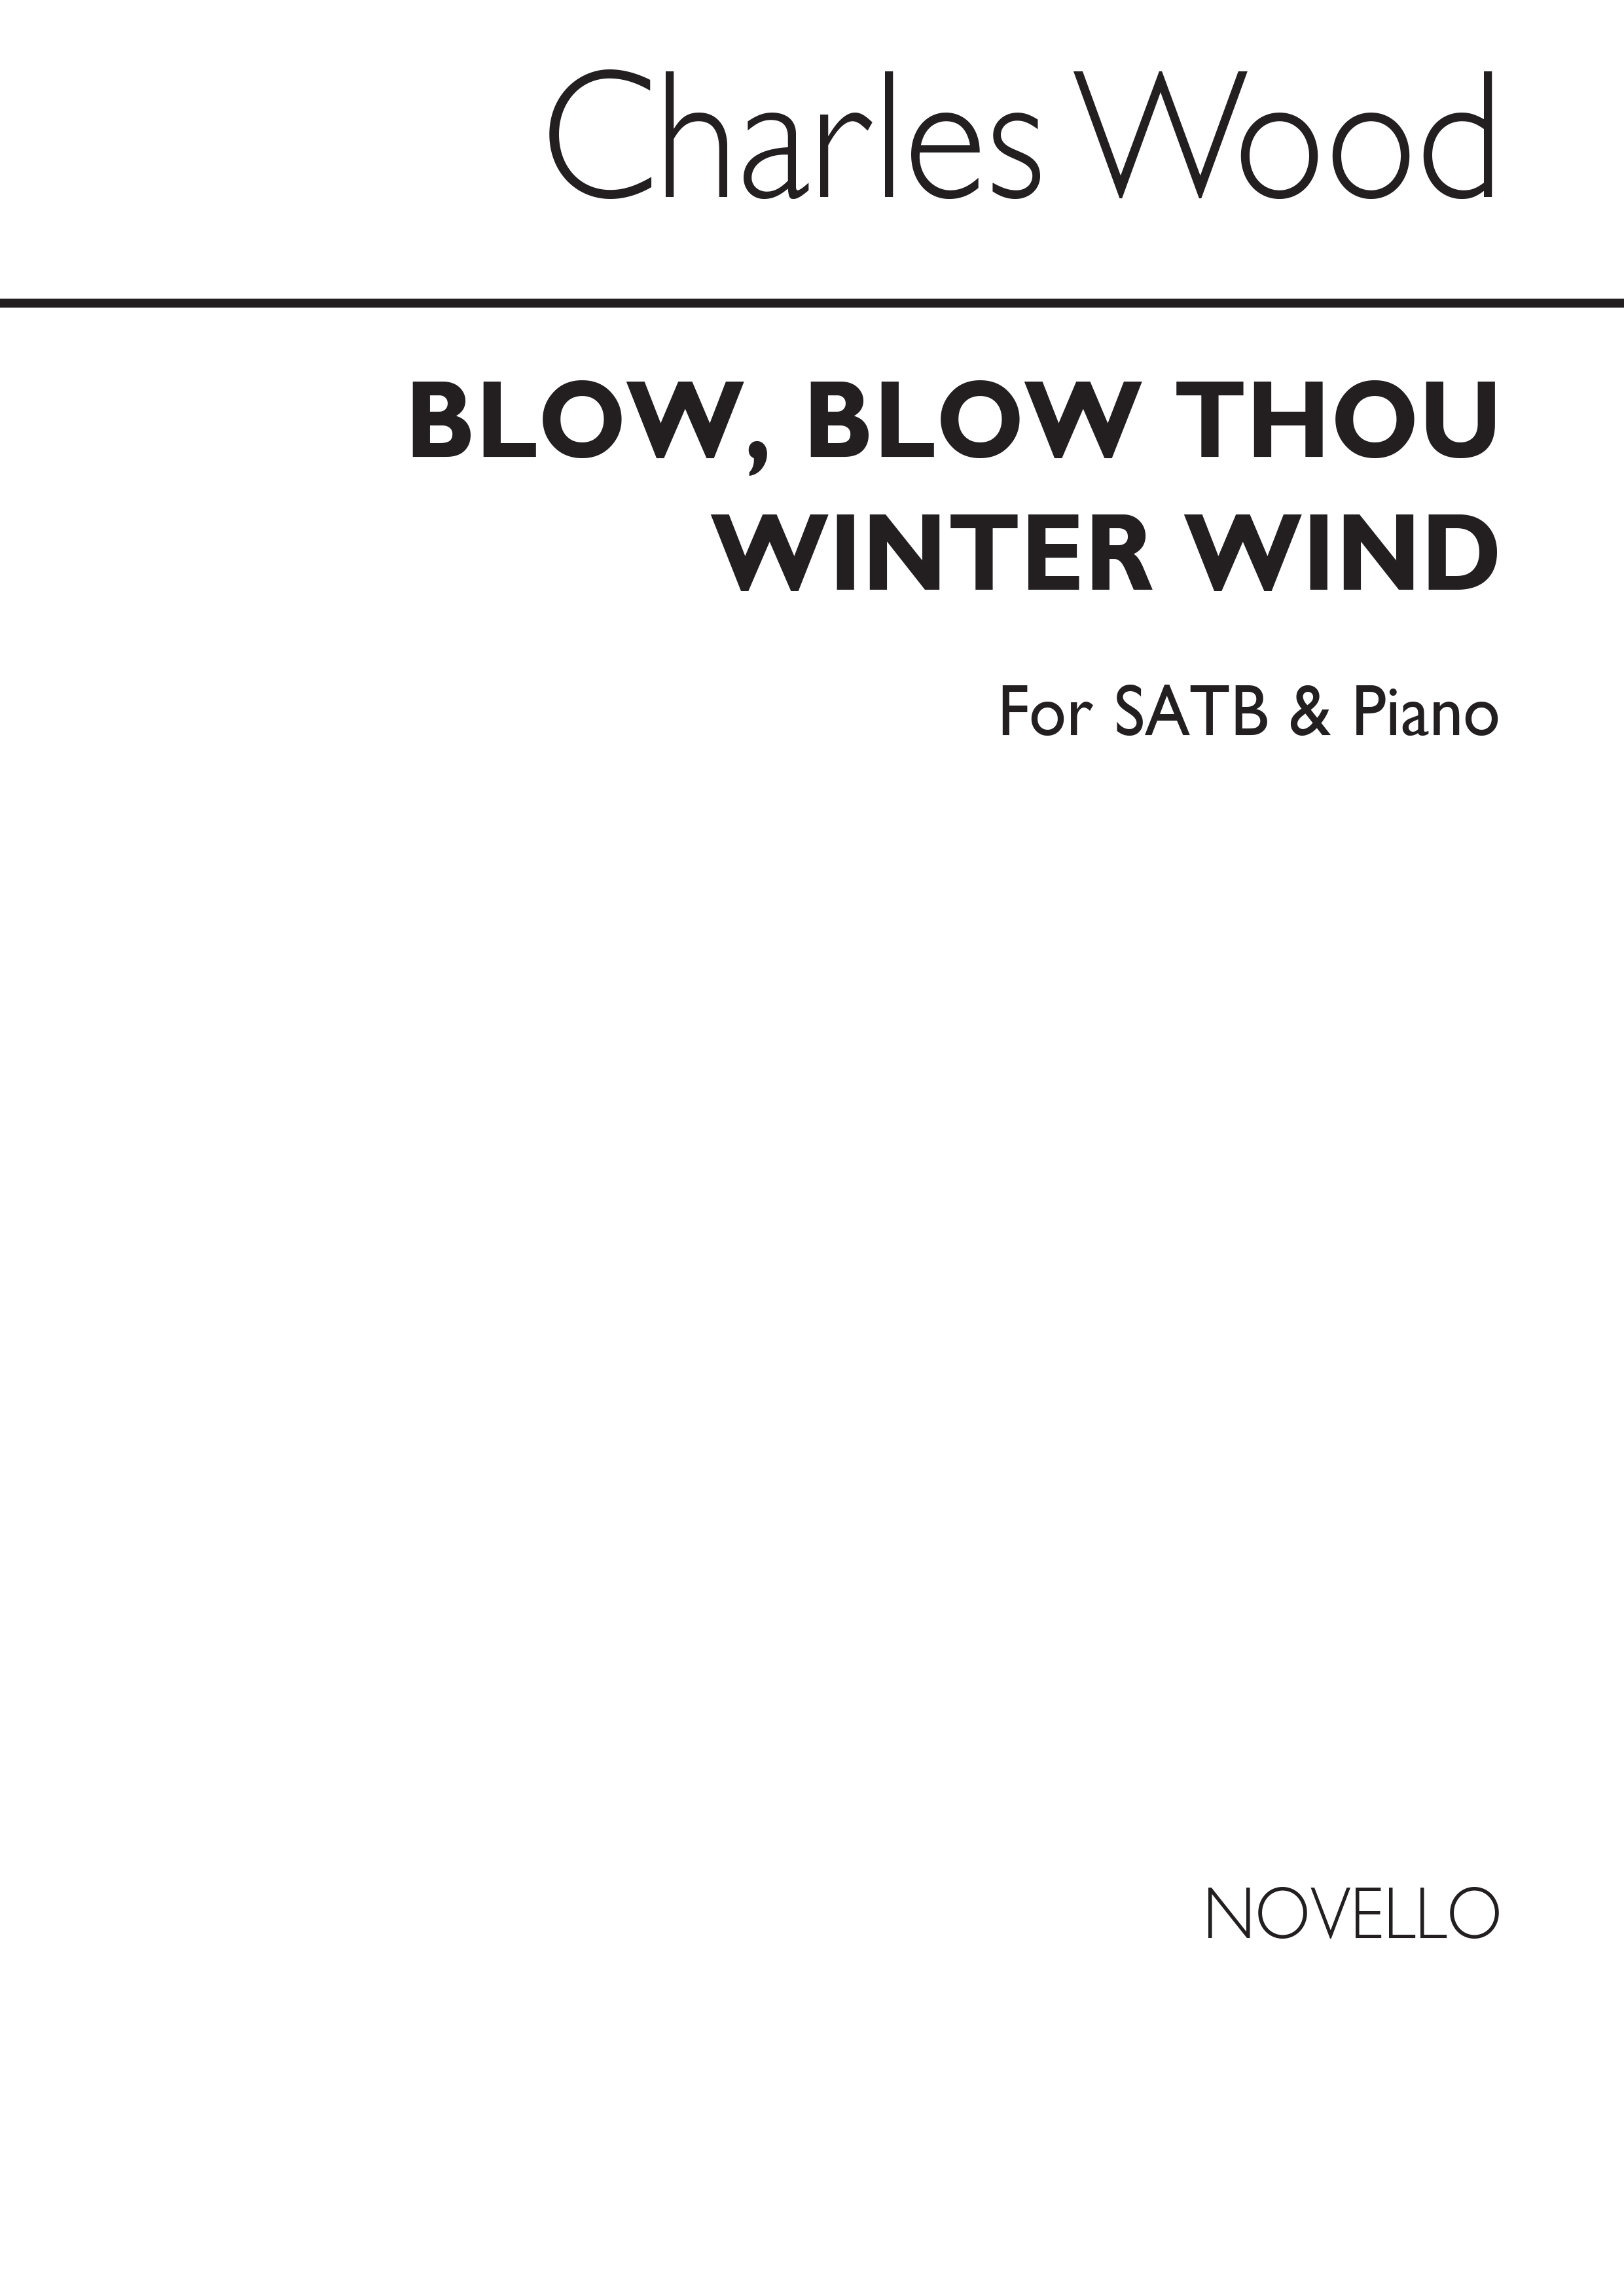 Charles Wood: Blow, Blow Thou Winter Wind Satb/Piano